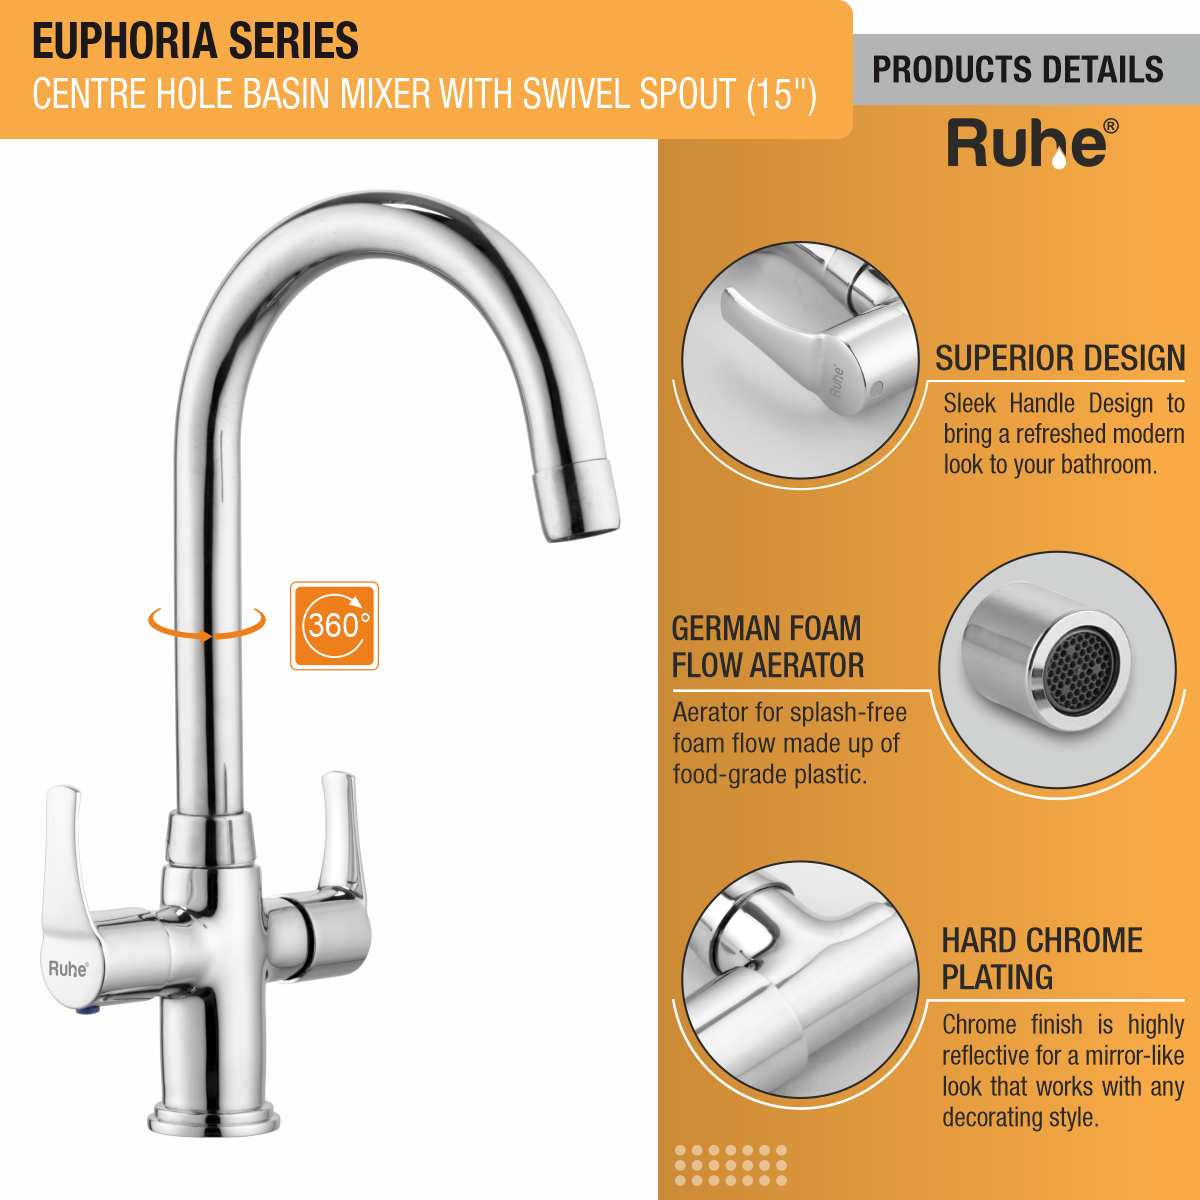 Euphoria Centre Hole Basin Mixer with Medium (15 inches) Round Swivel Spout Faucet product details